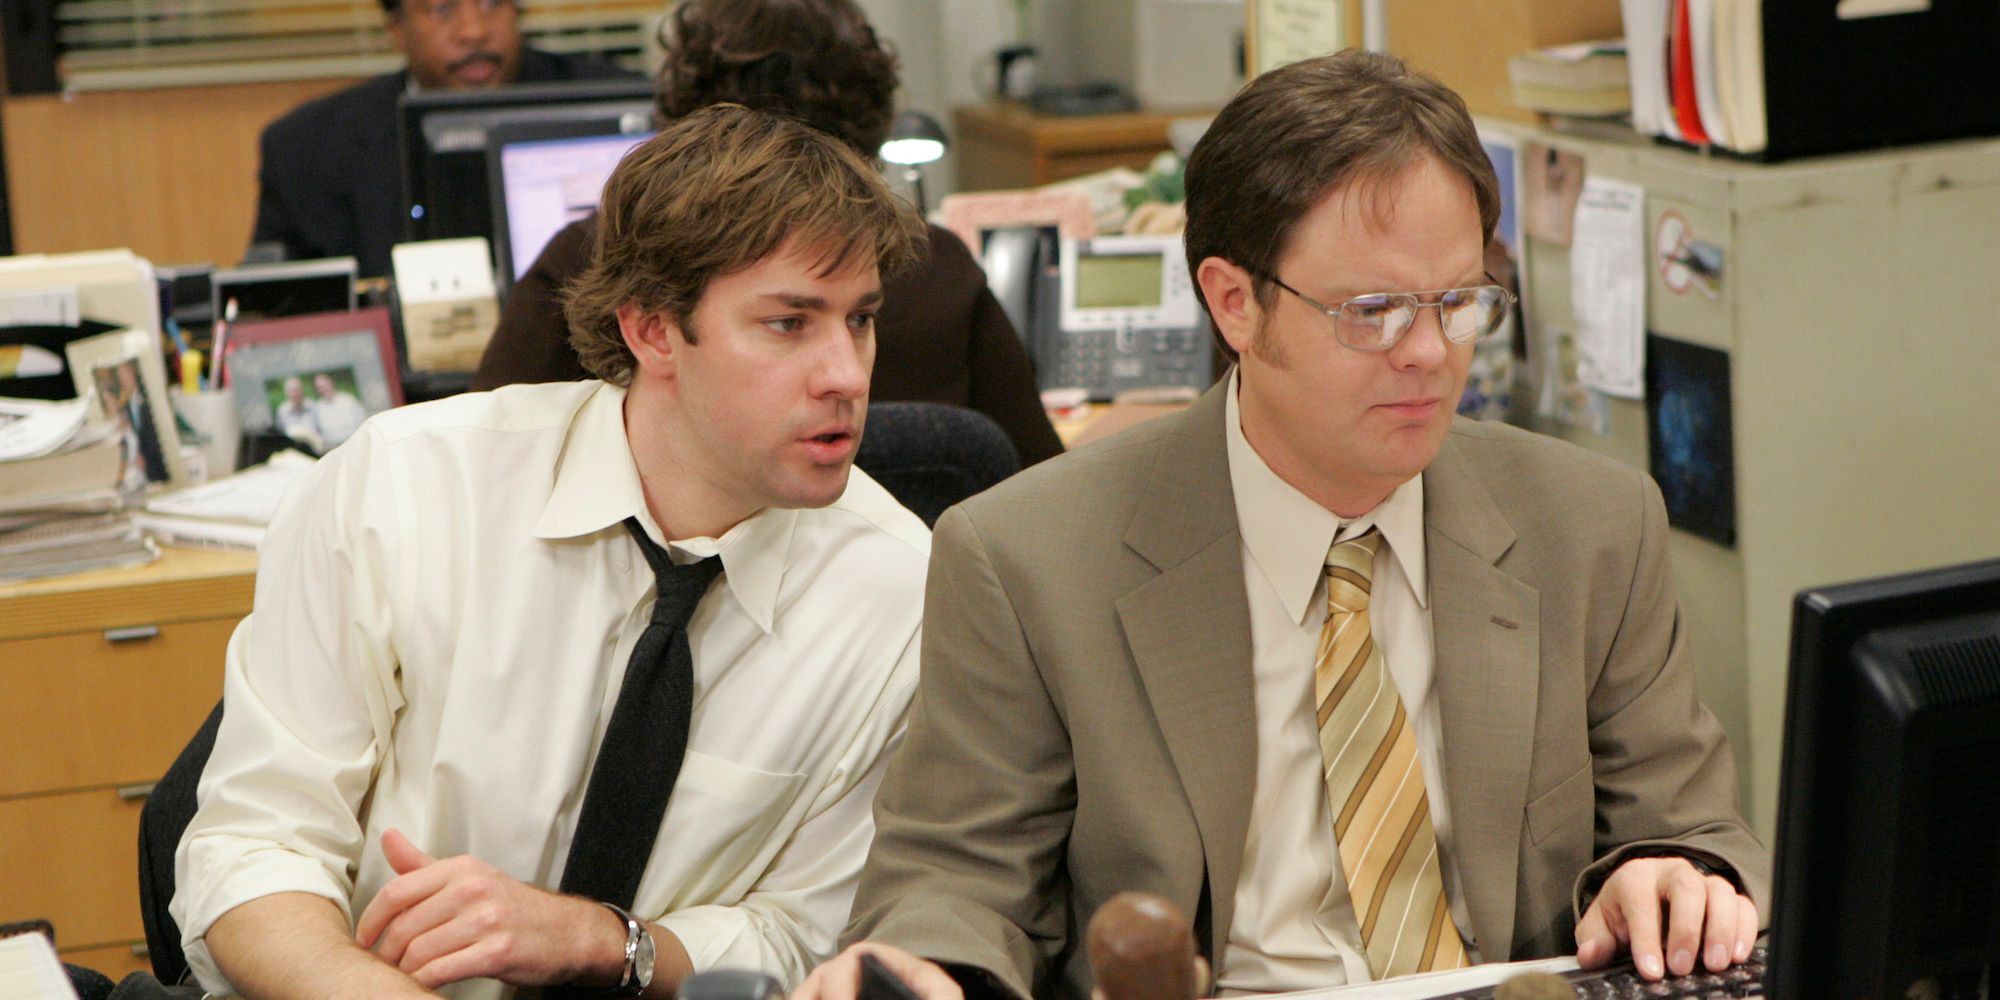 Jim and Dwight from The Office comedy series.